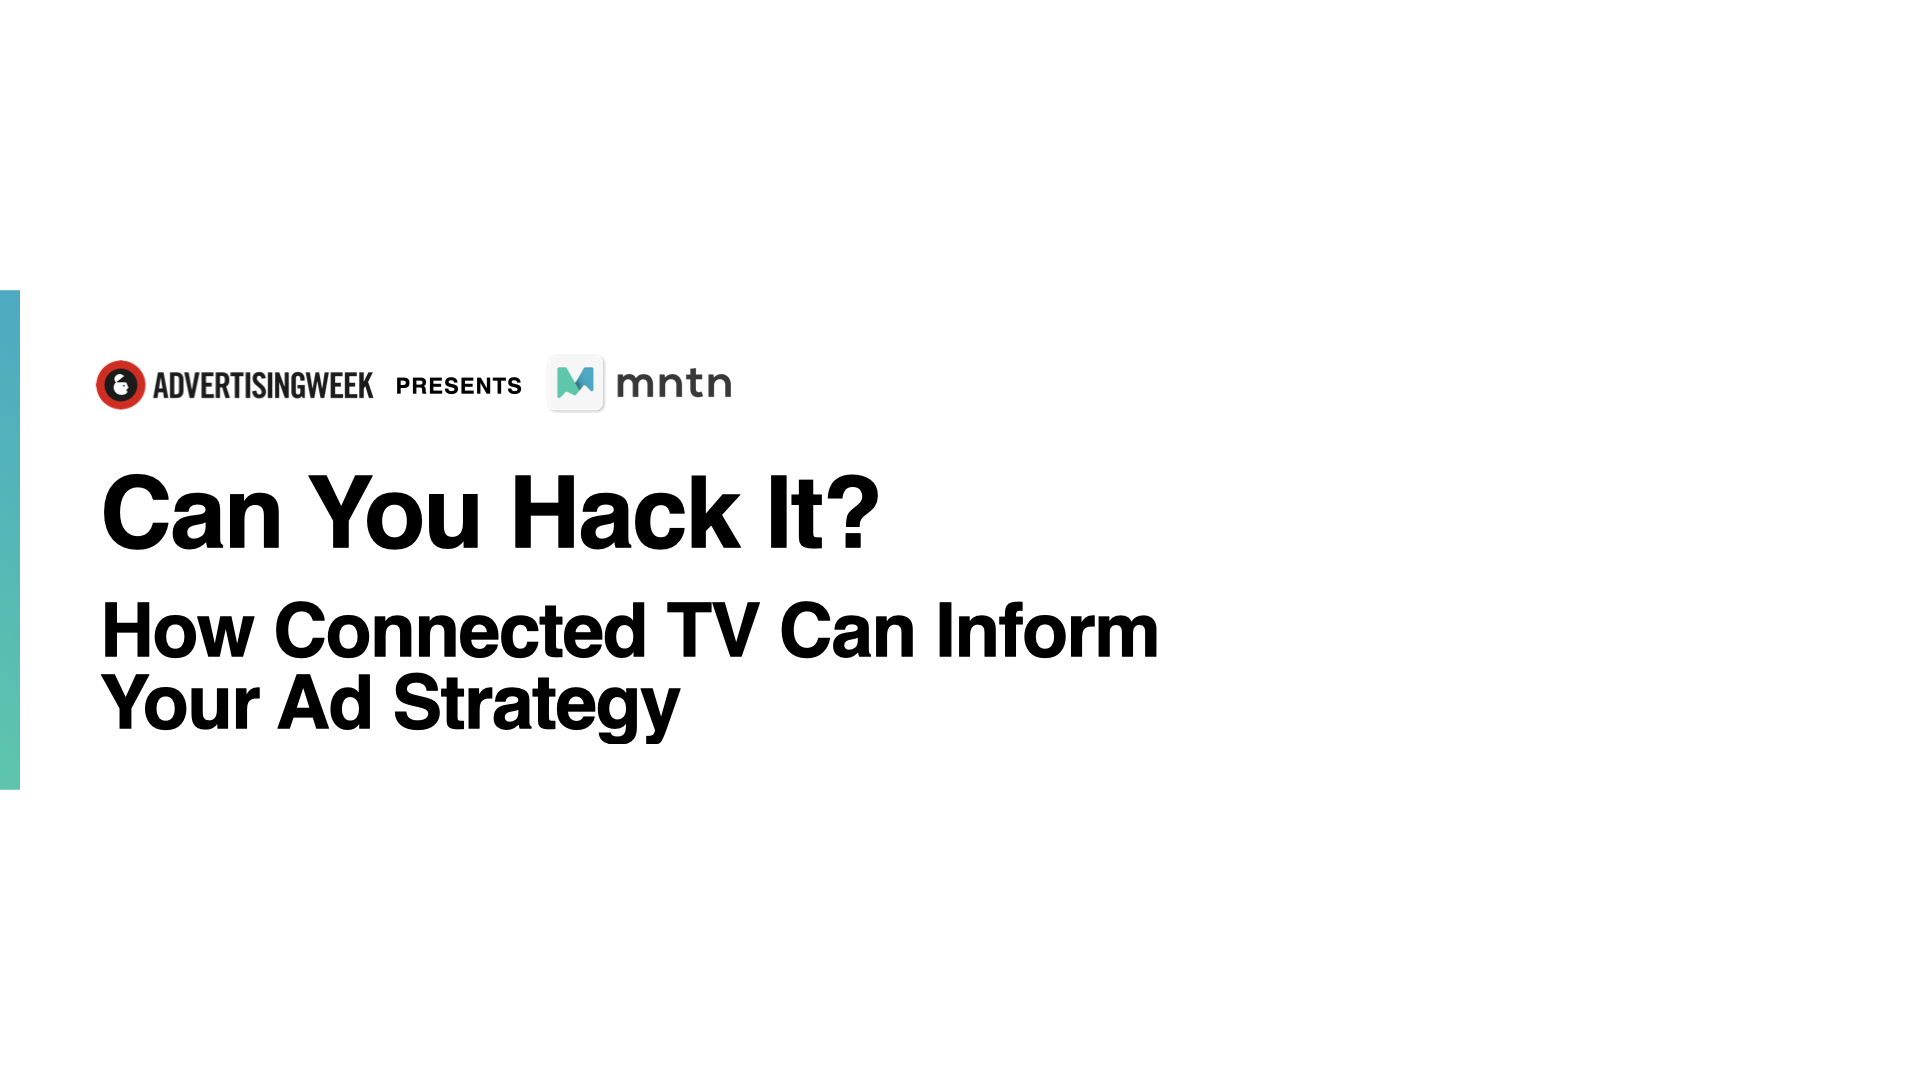 Can You Hack It? How Connected TV Can Inform Your Ad Strategy